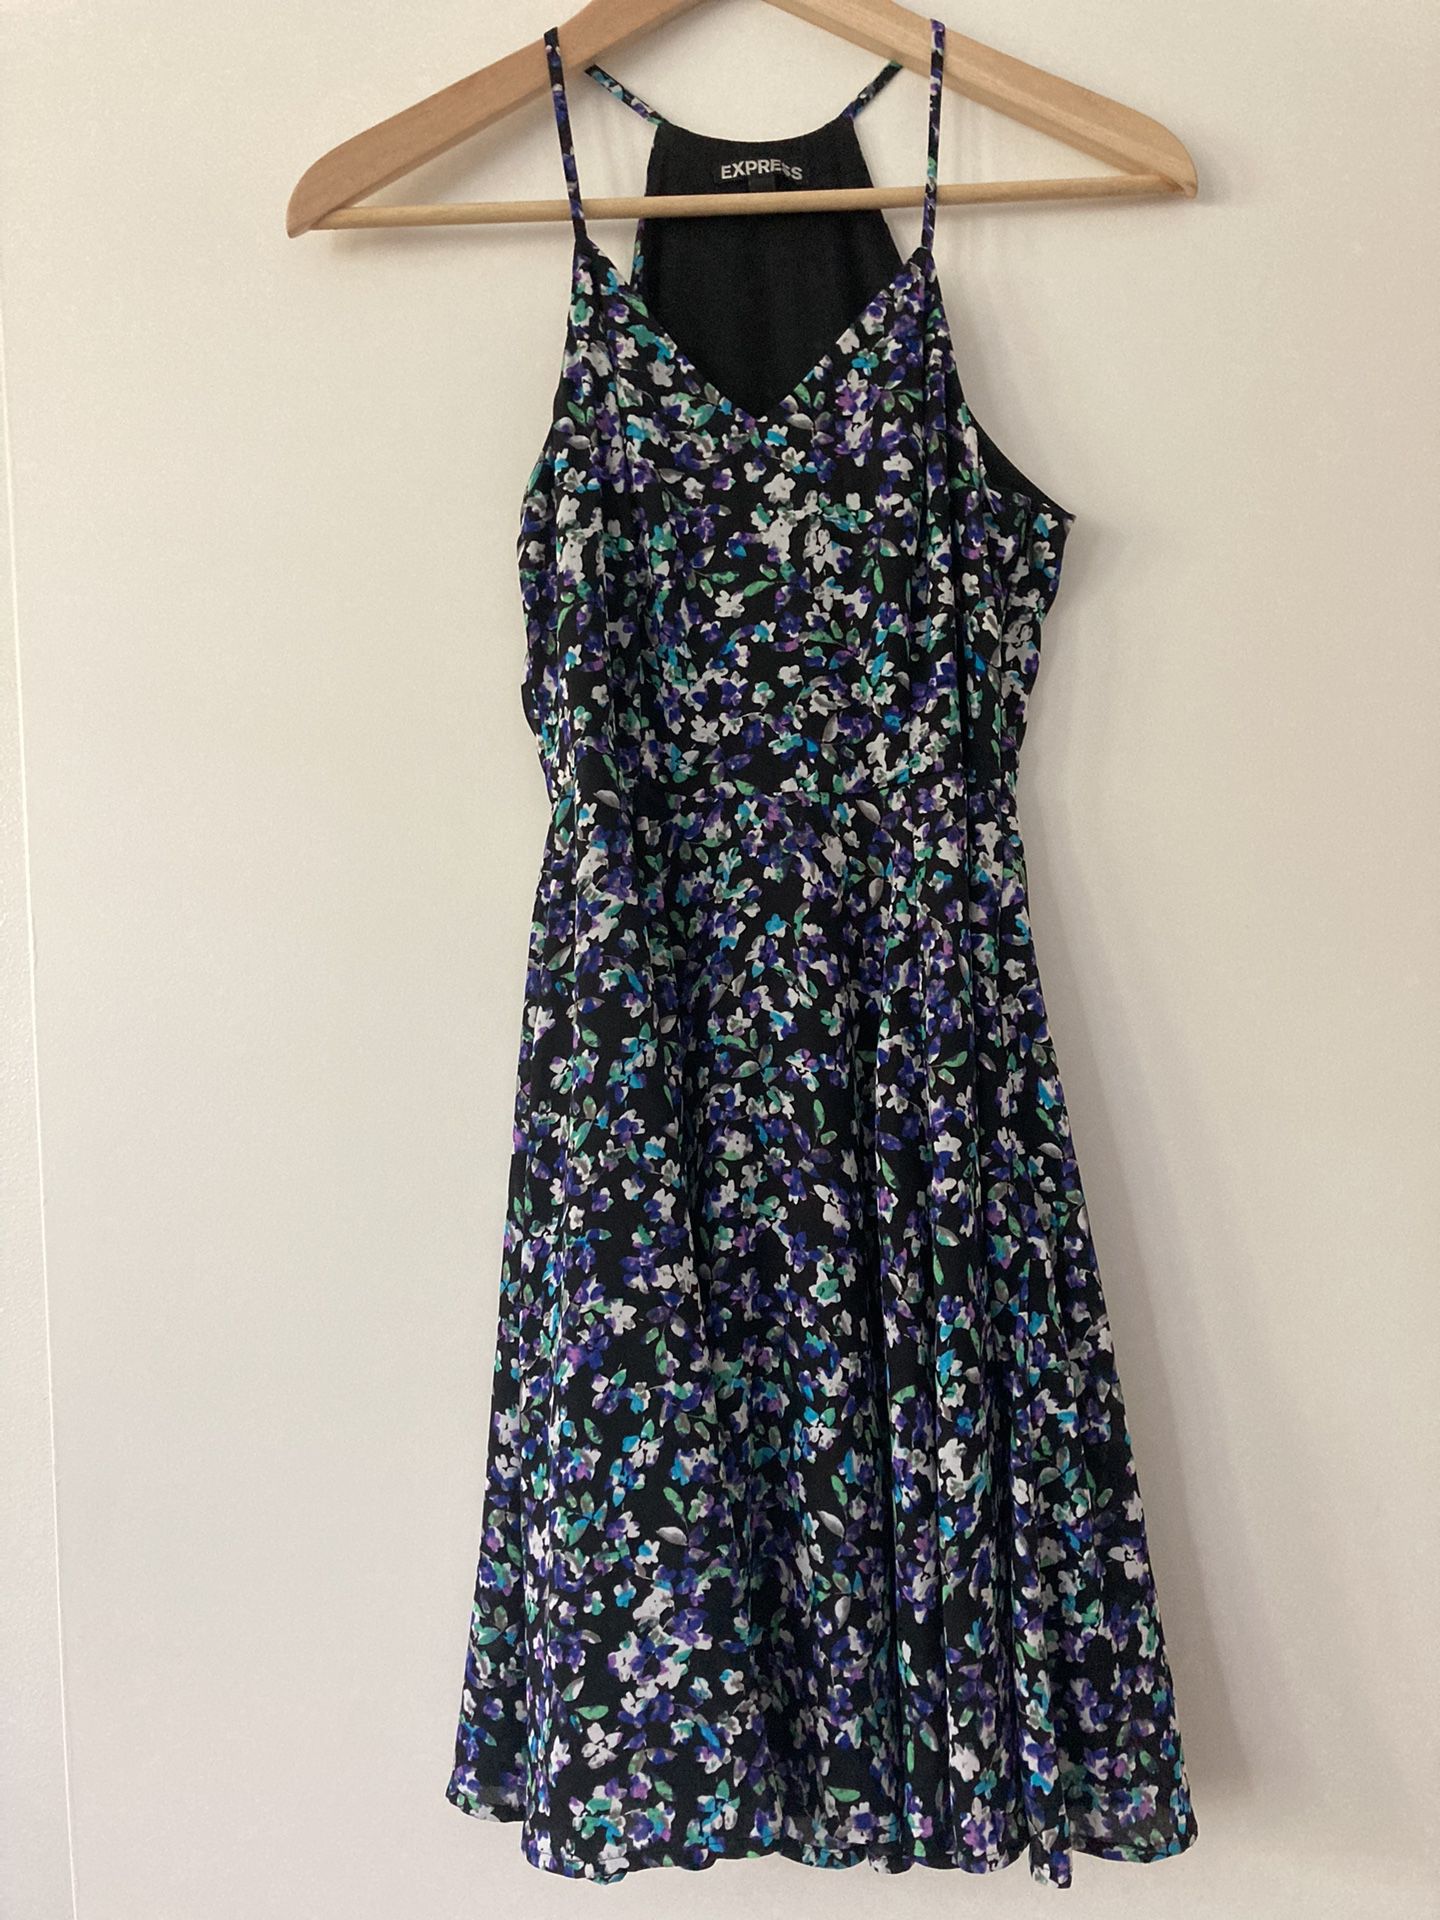 Preowned EXPRESS Floral Dress - Black / purple / blue / green - Size 0